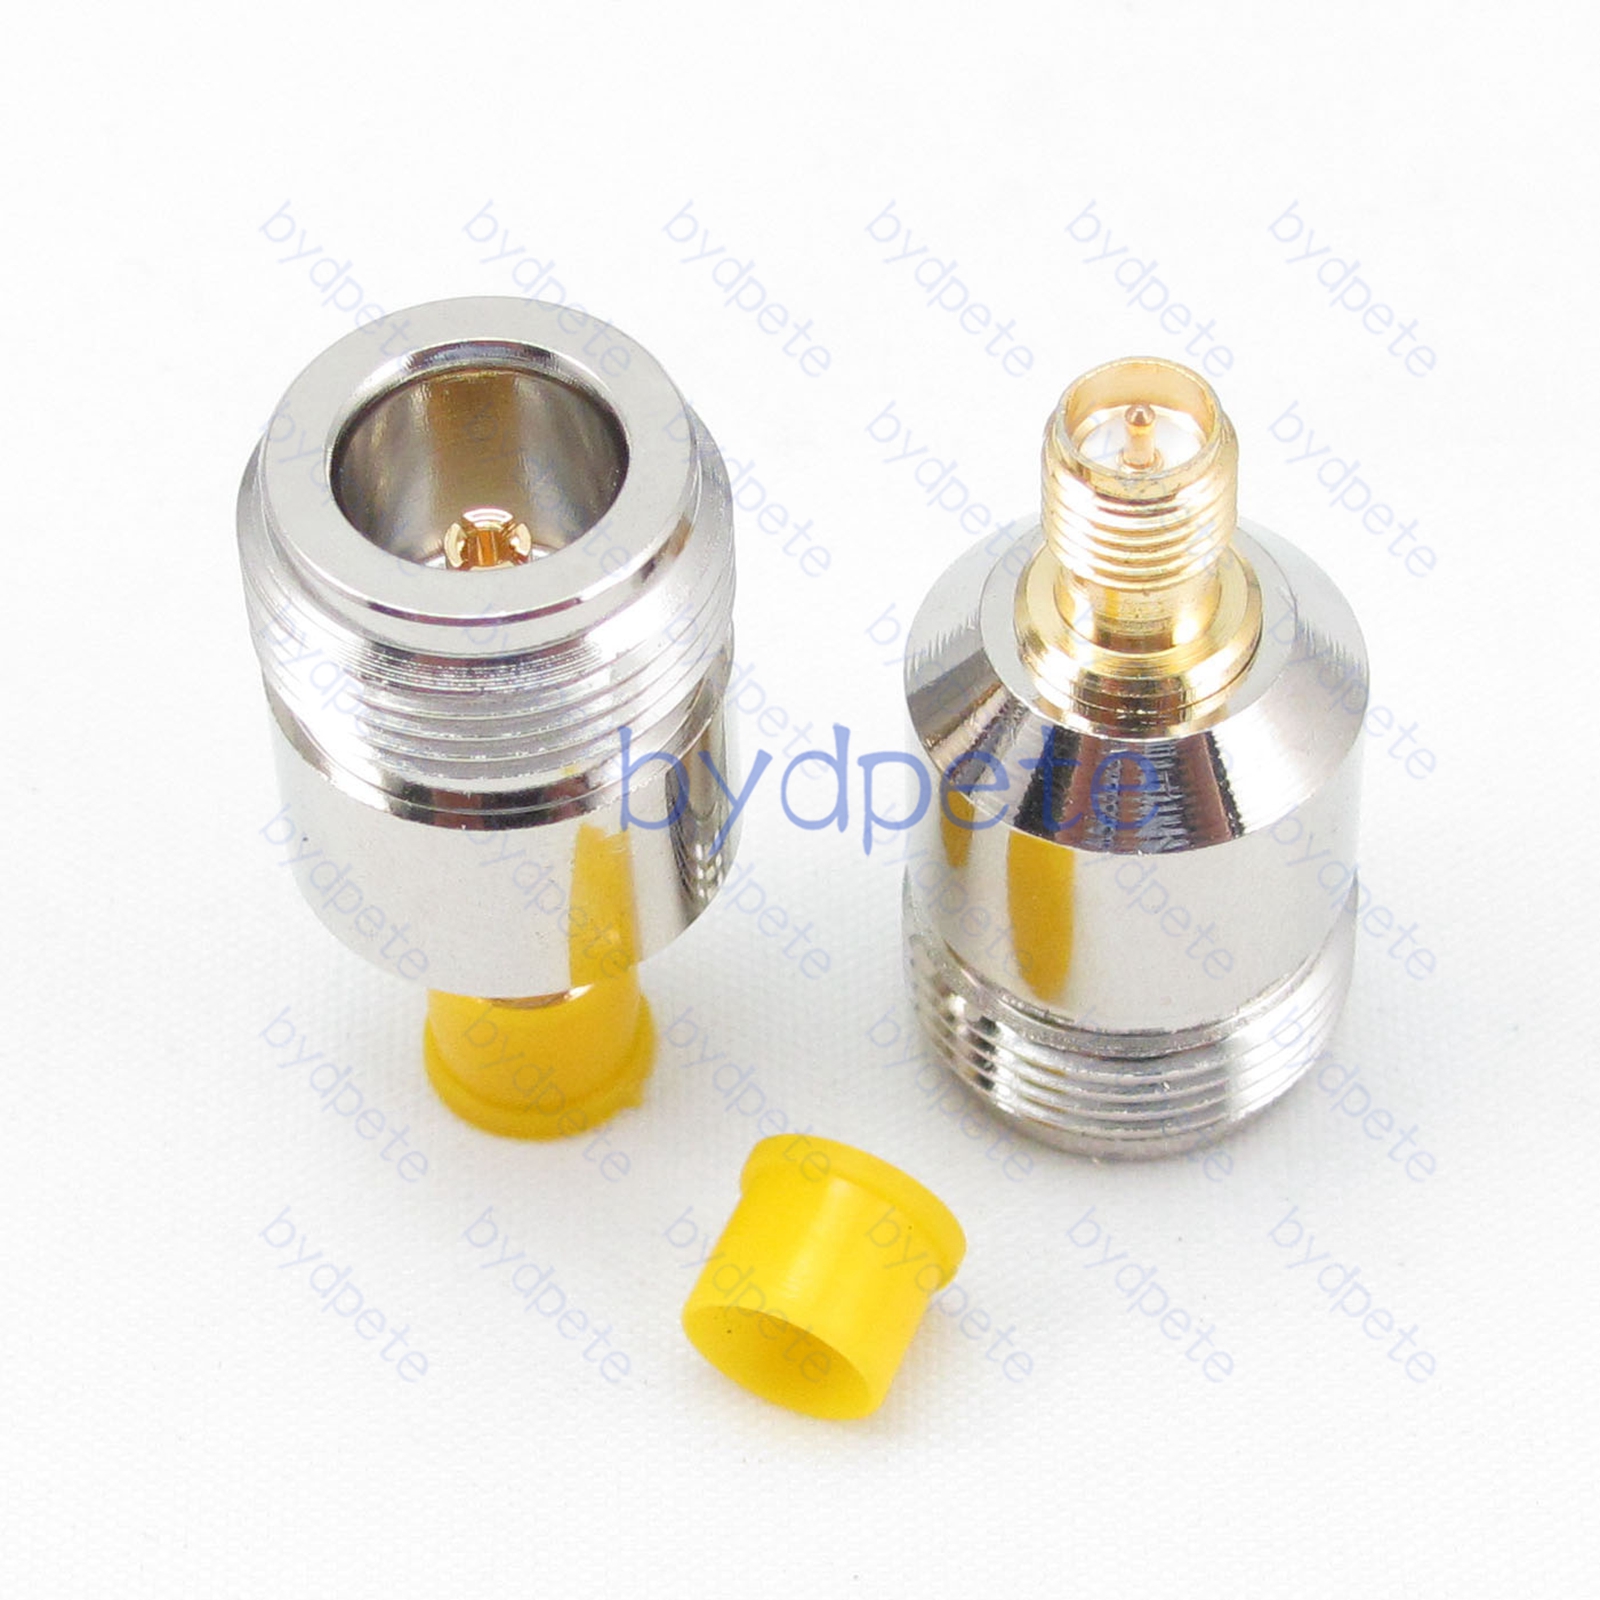 RP-SMA Female Jack to N Female Jack Straight RF Connector Adapter bydpete BYDB028NG